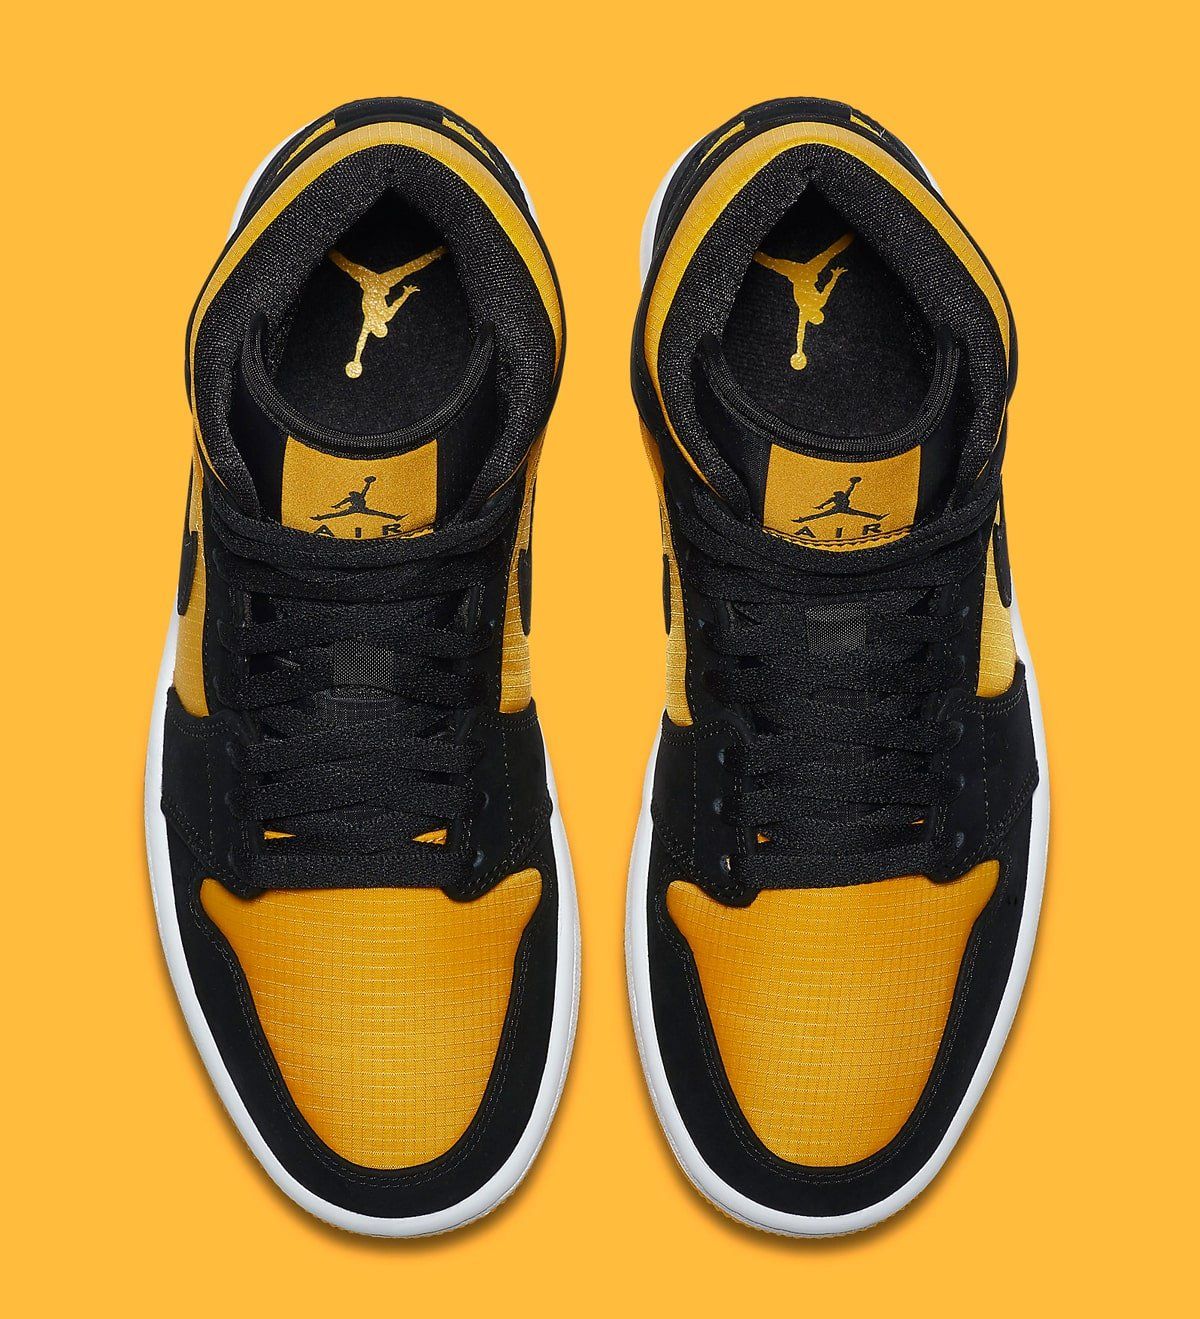 These "Taxi" Air Jordan 1 Mids are Available Early! | HOUSE OF HEAT